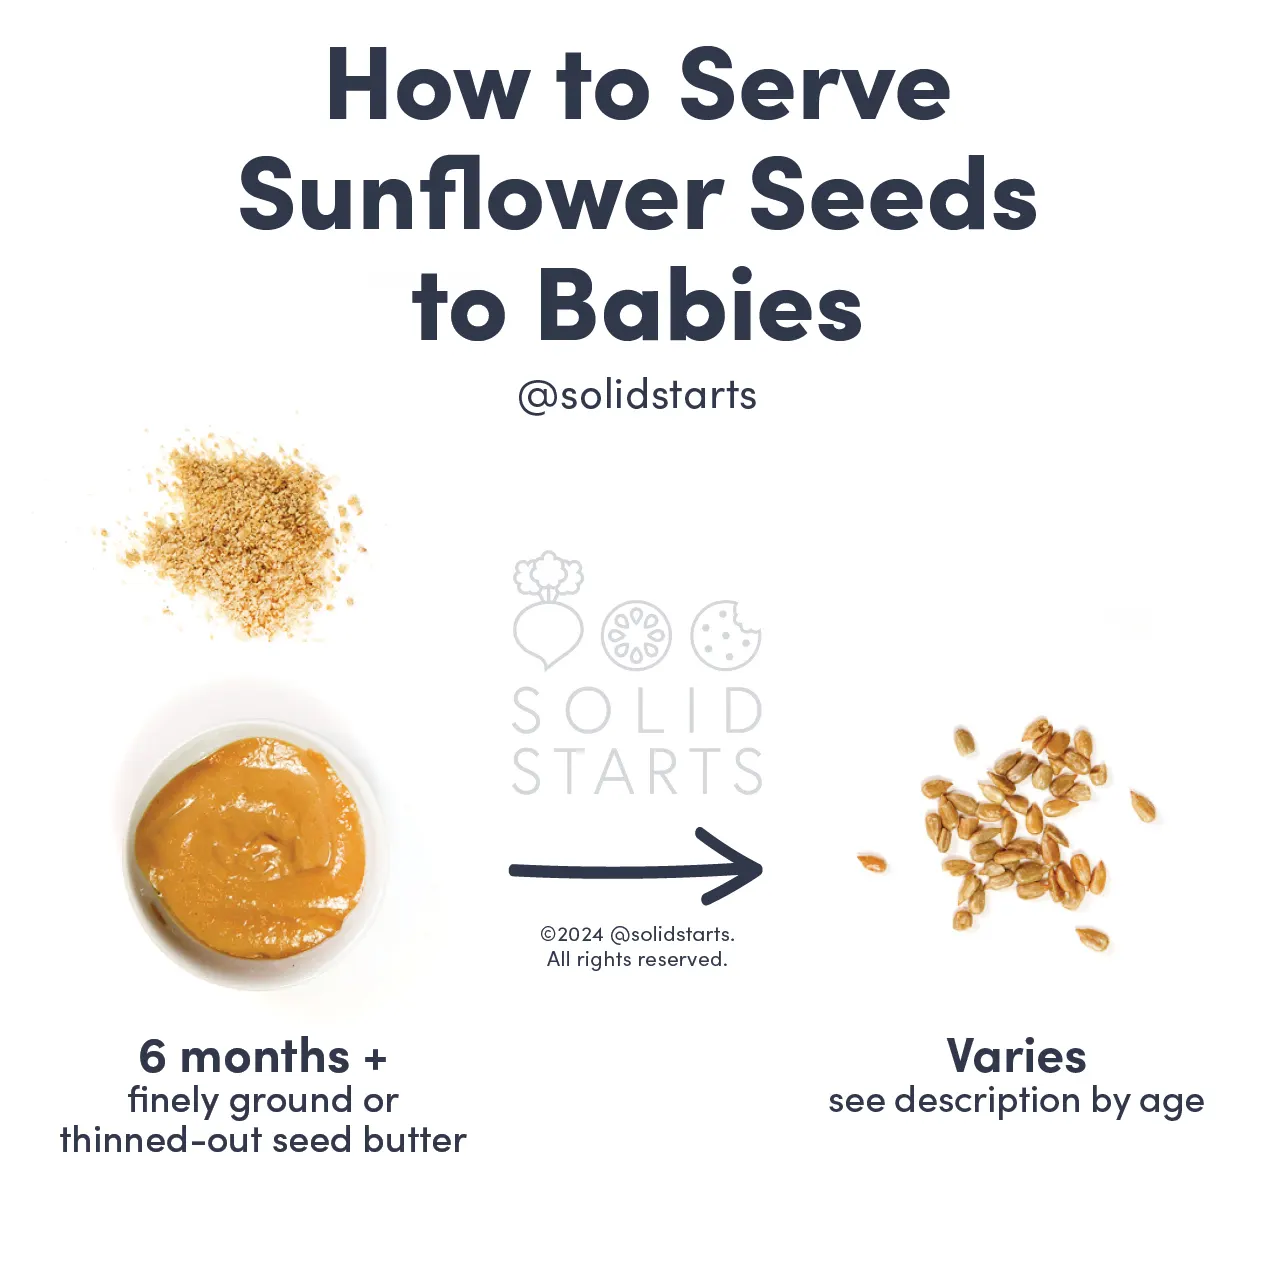 a Solid Starts infographic with the header How to Serve Sunflower Seeds to Babies: finely ground or thinned-out seed butter for 6 mos+, and age varies for whole seeds